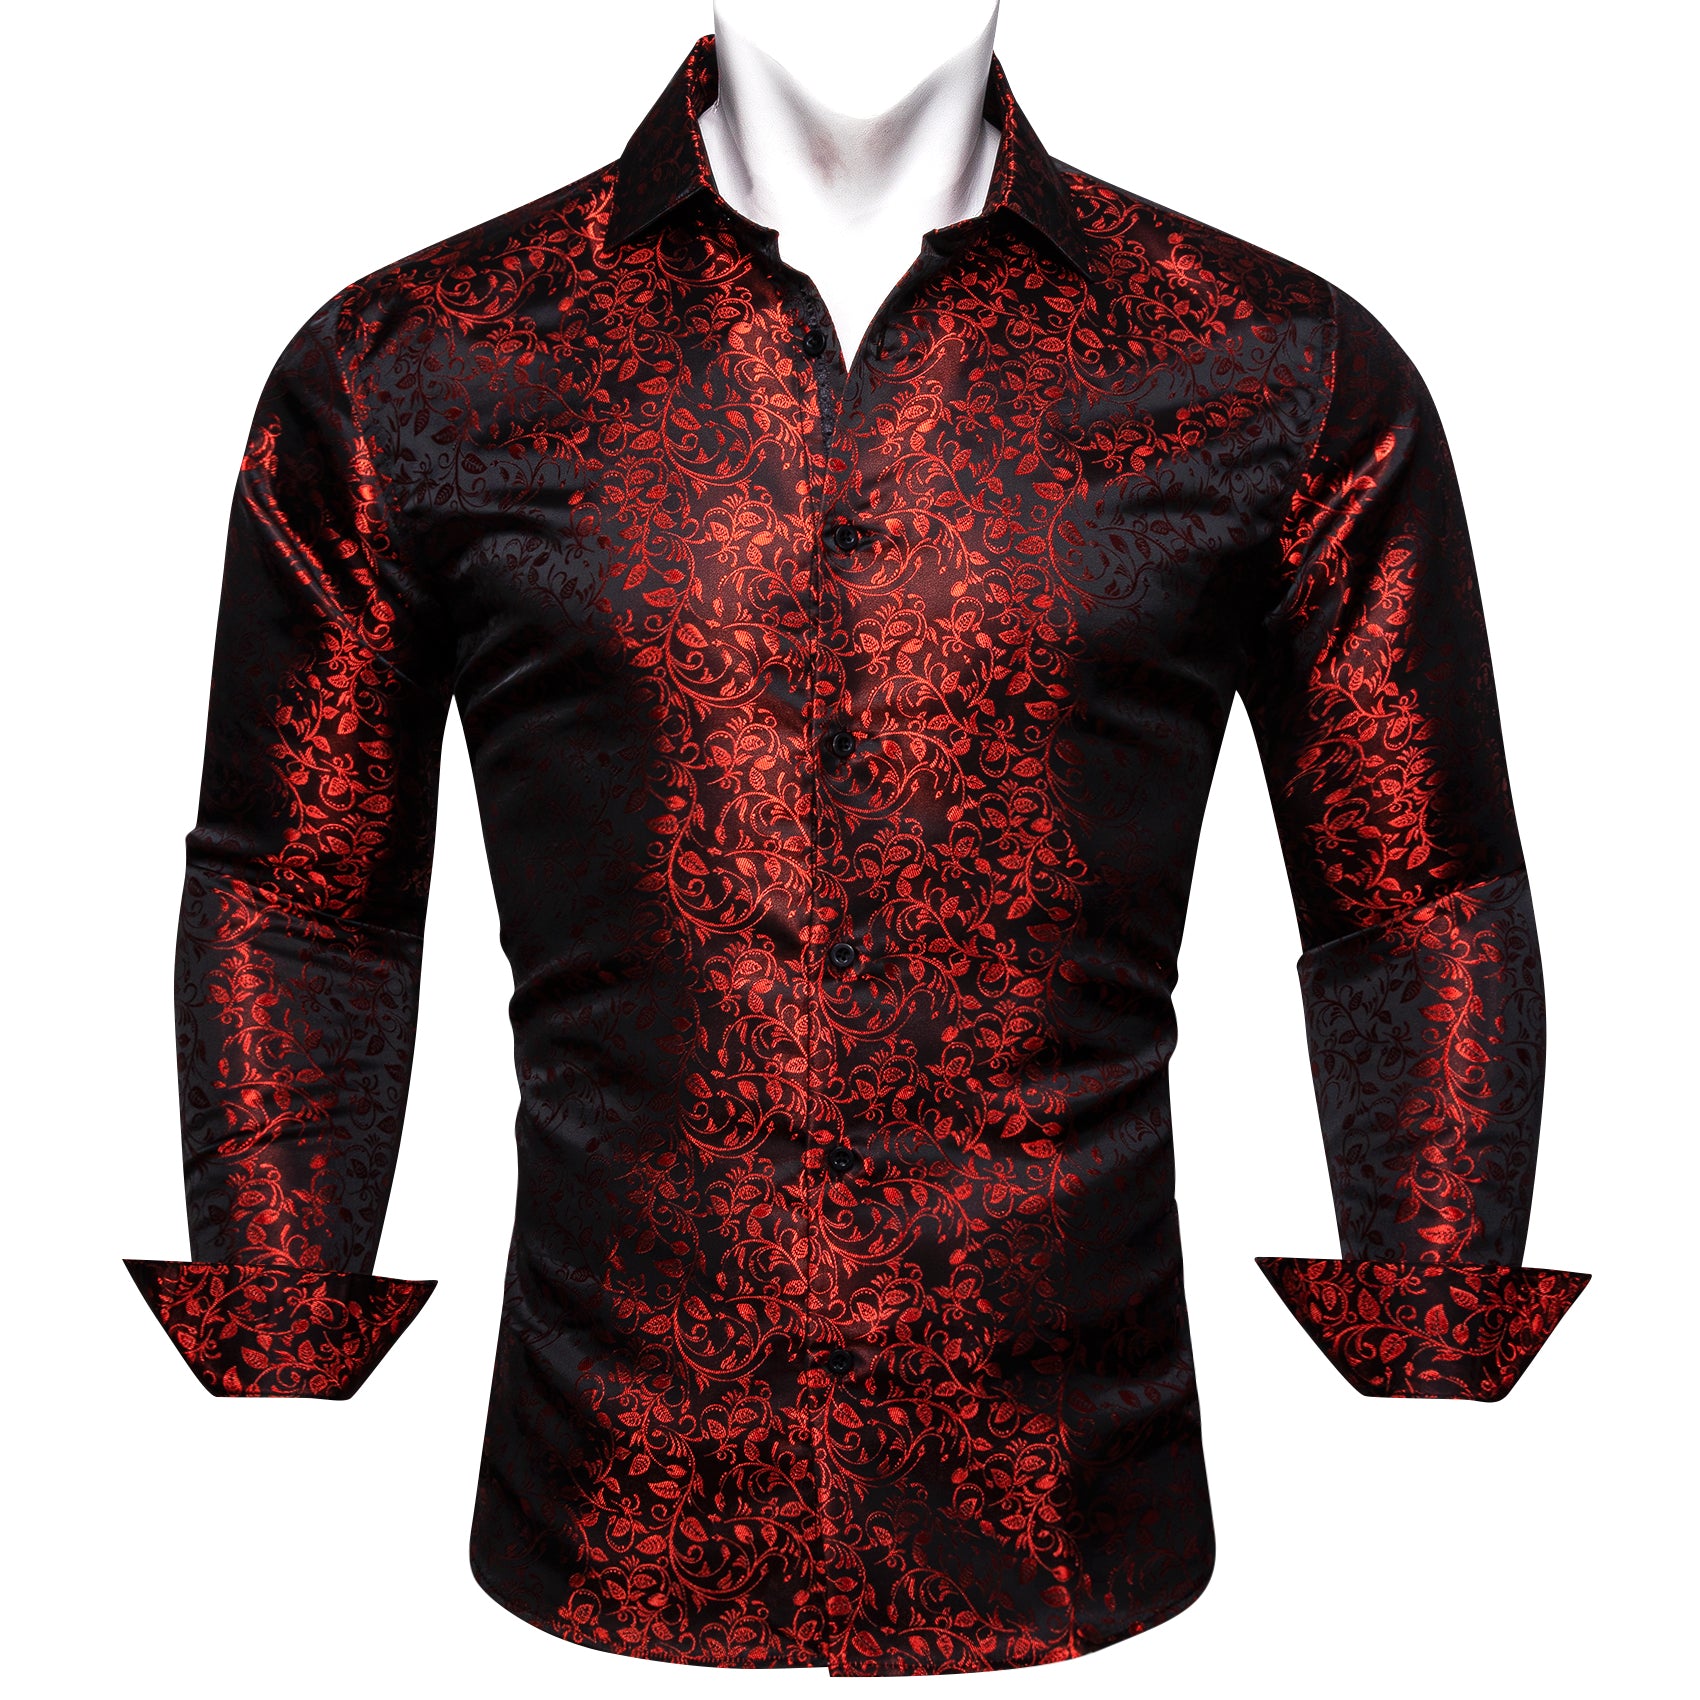 Barry.wang Luxury Burgundy Red Leaves Floral Silk Shirt